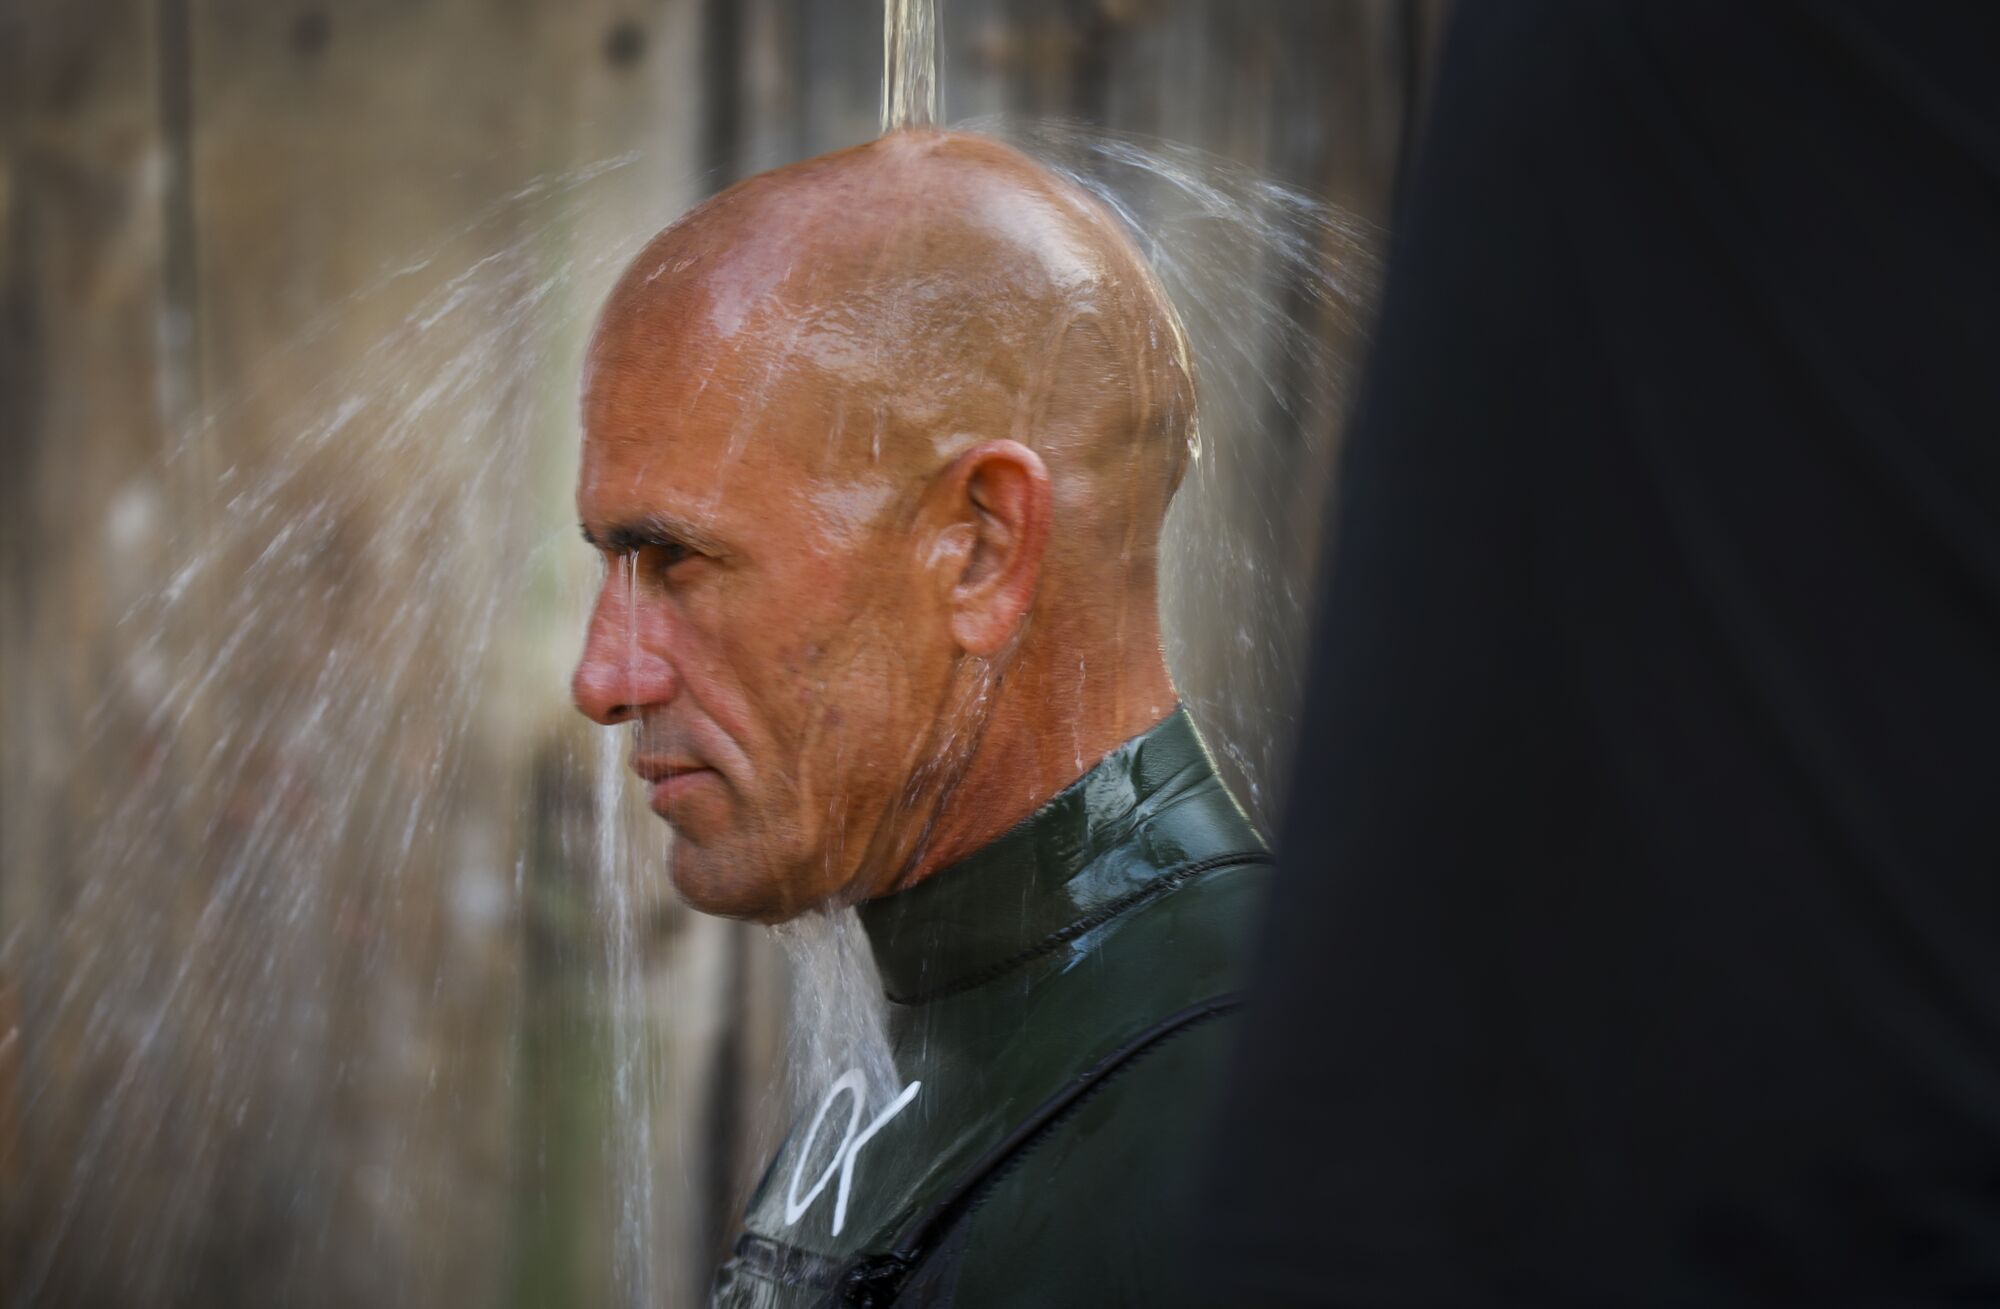 Kelly Slater showers off